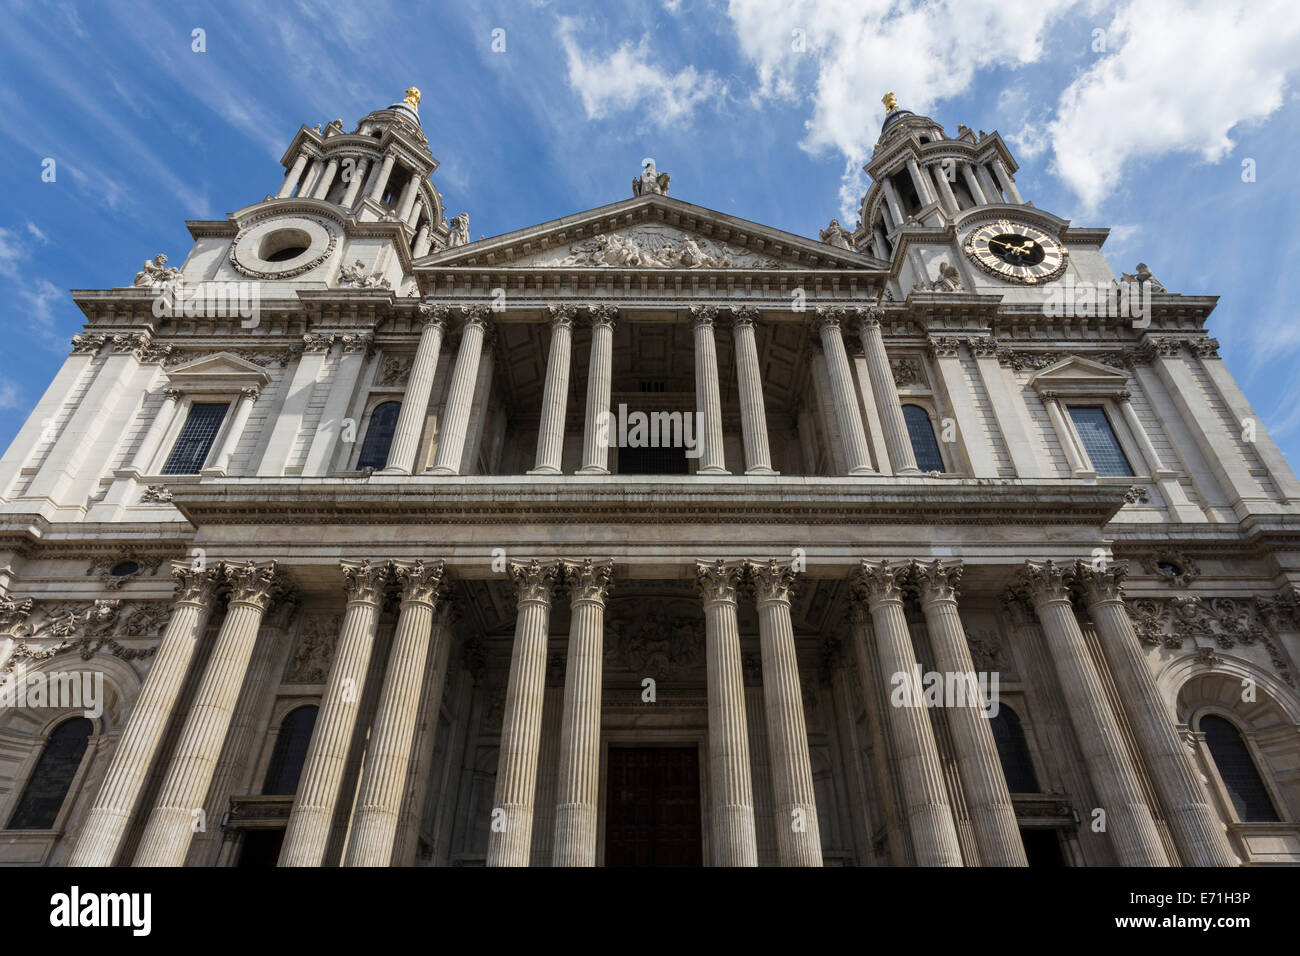 Facade of Saint Paul's Cathedral, City of London, England, United Kingdom Stock Photo